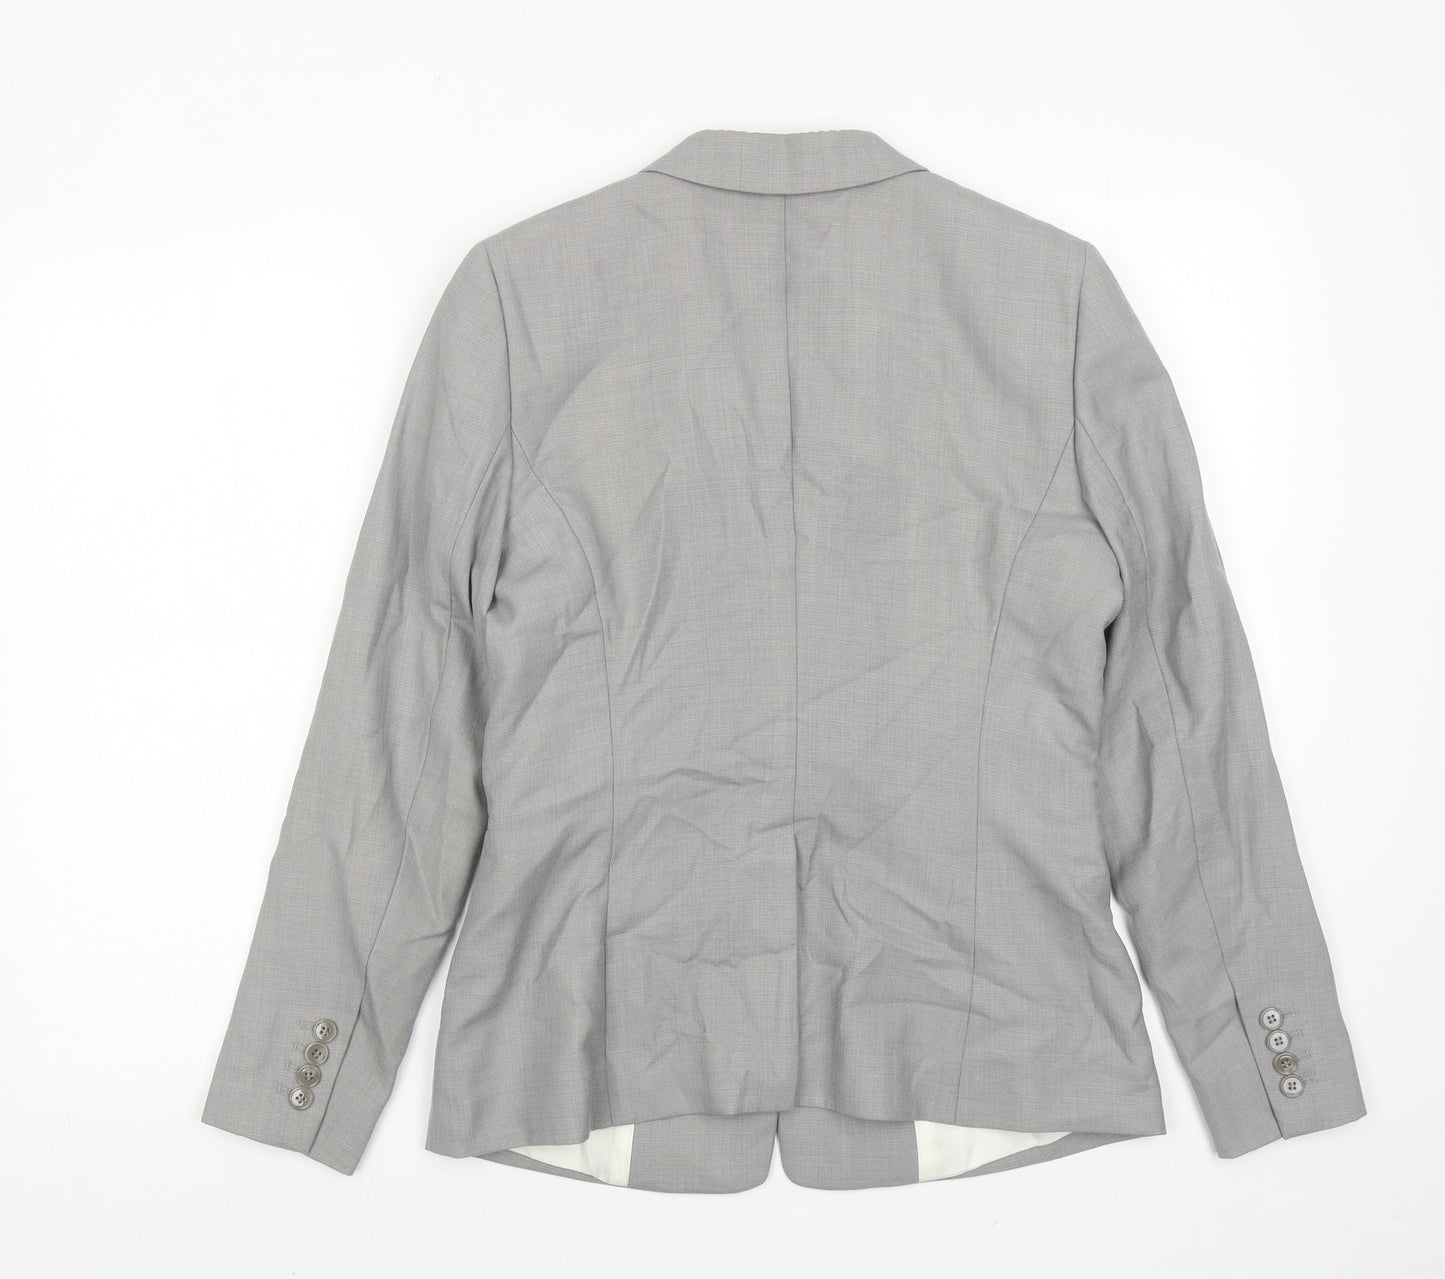 Reiss Womens Grey Polyester Jacket Suit Jacket Size 12